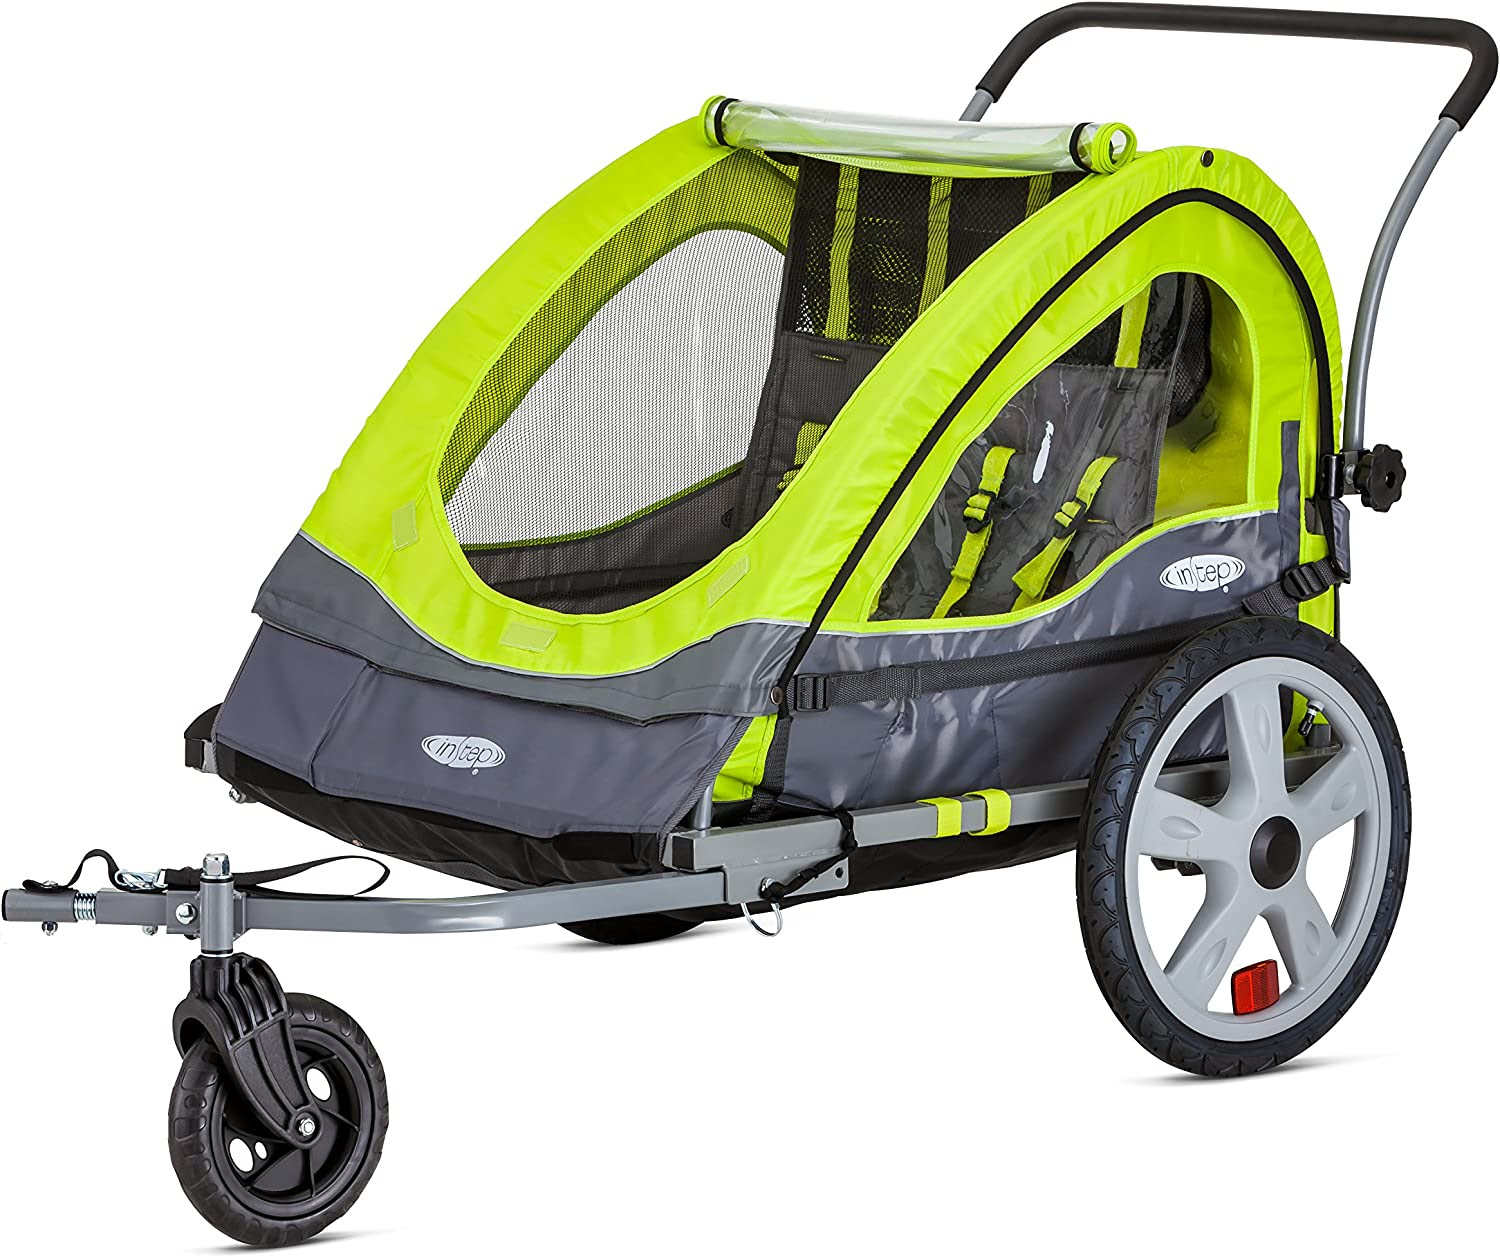 Instep Quick-N-EZ Double Tow Behind Bike Trailer for Kids. Great for pets or grocerys 1090 units. EXW New Jersey $95.00 unit.